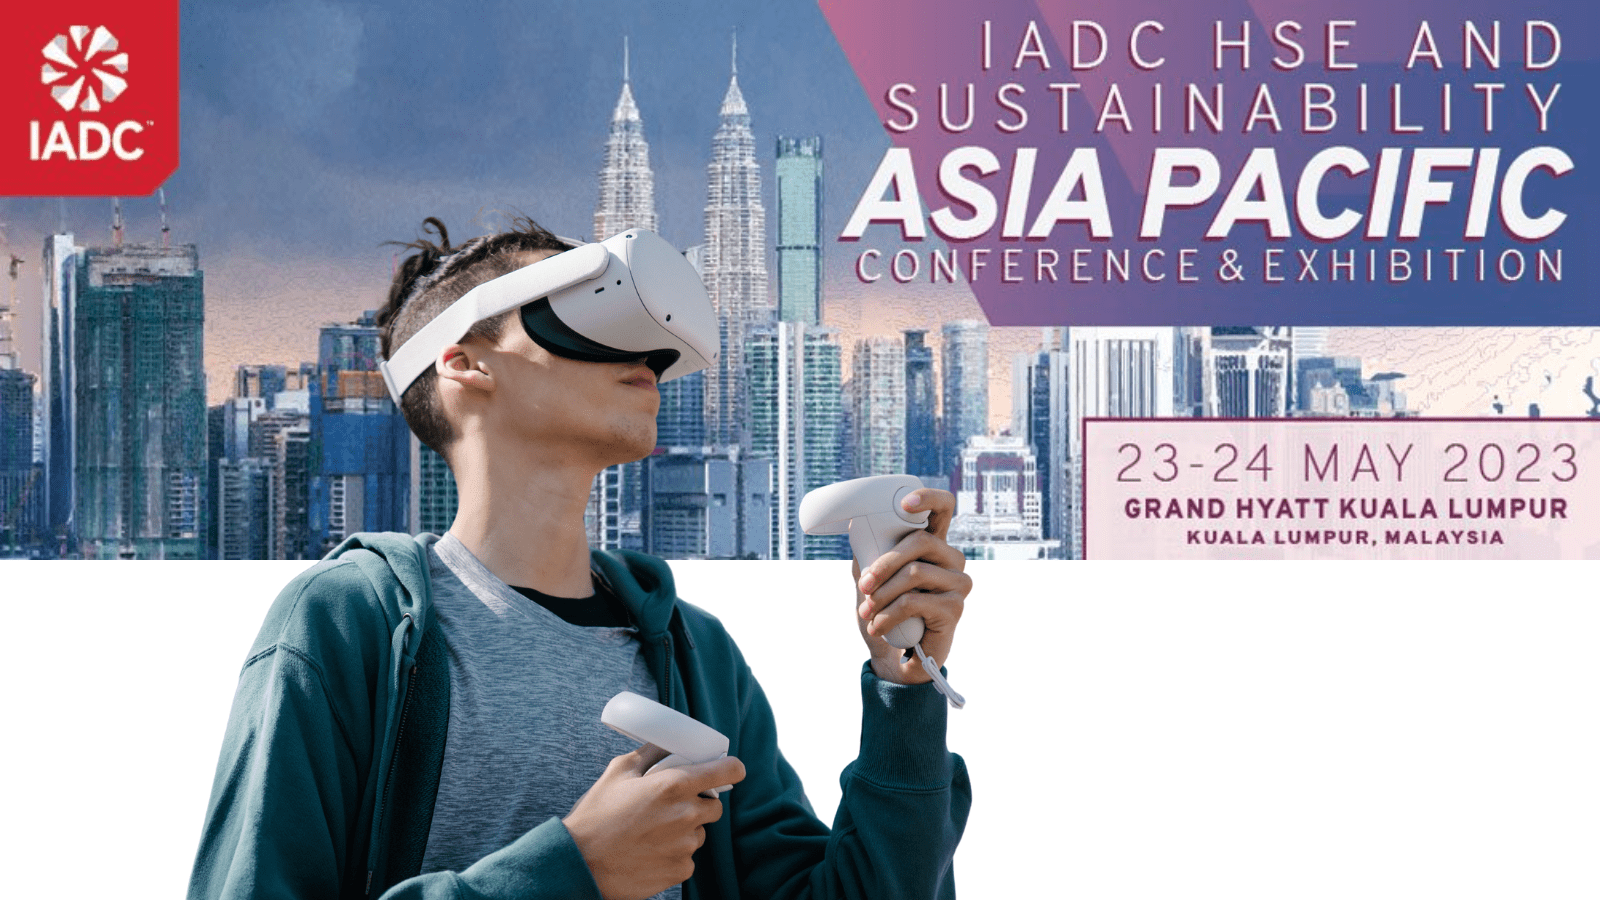 Boy wearing a VR Headset looking at a banner of the IADC HSE & Sustainability Conference and Exhibition Asia Pacific from 23-24 May.